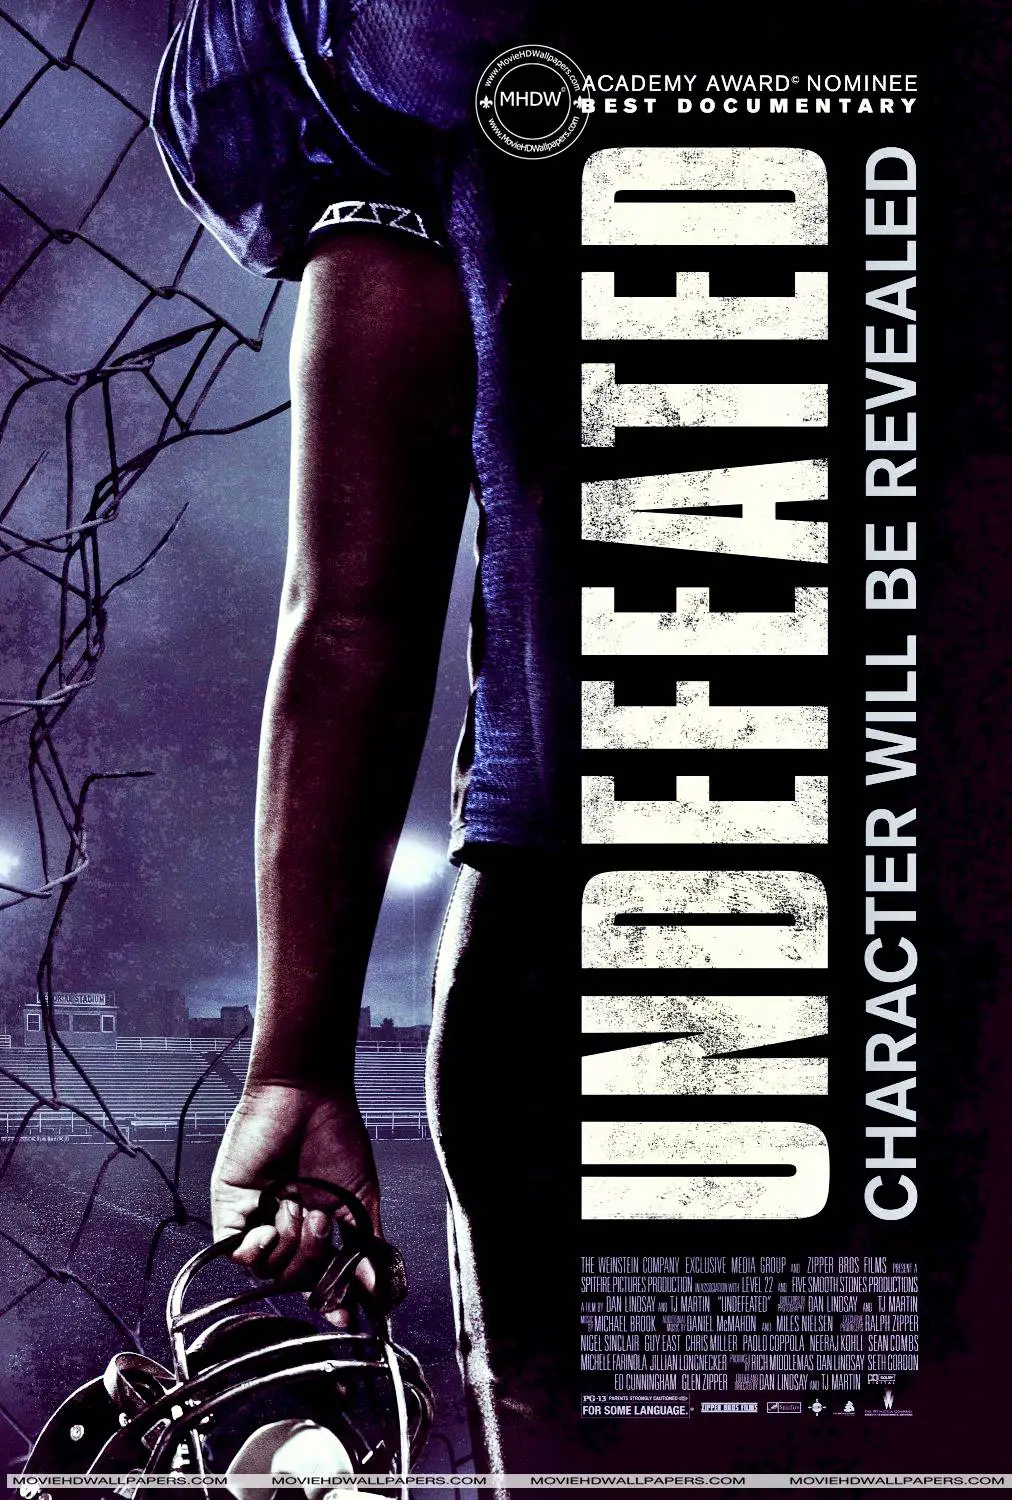 Undefeated (2011)